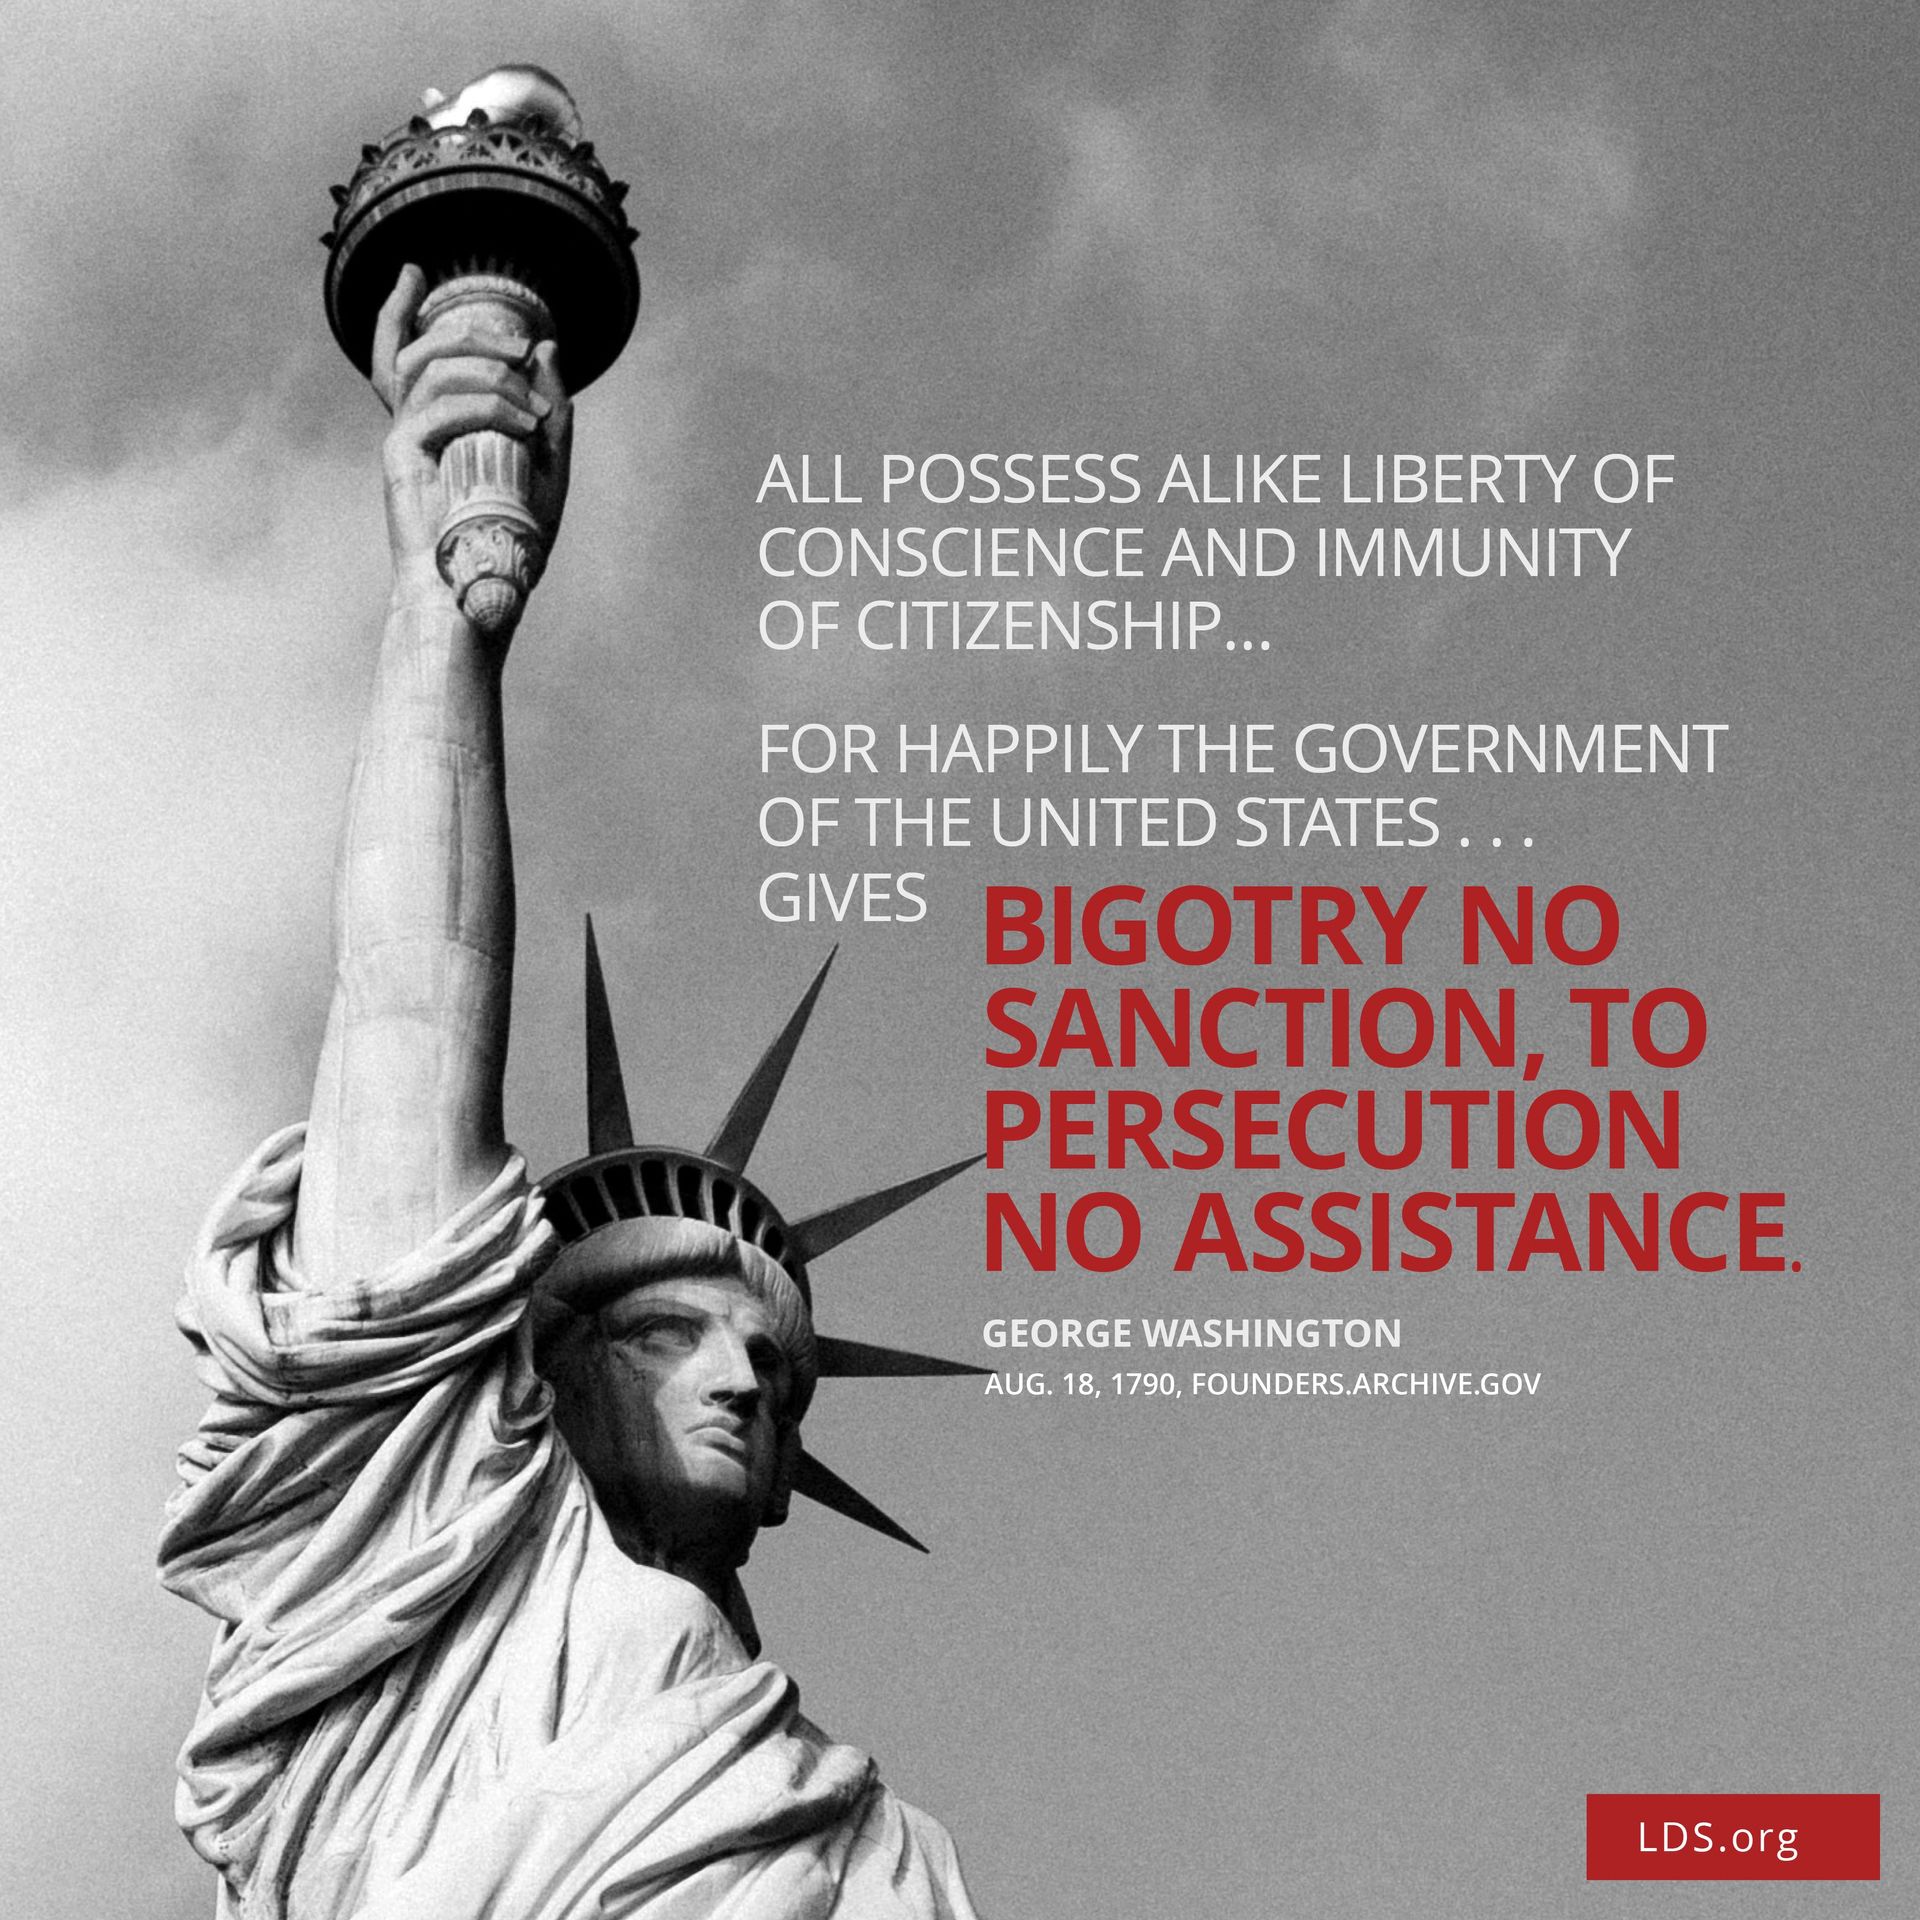 “All possess alike liberty of conscience and immunities of citizenship. … For happily the Government of the United States … gives to bigotry no sanction, to persecution no assistance.”—George Washington, Aug. 18, 1790, founders.archives.org